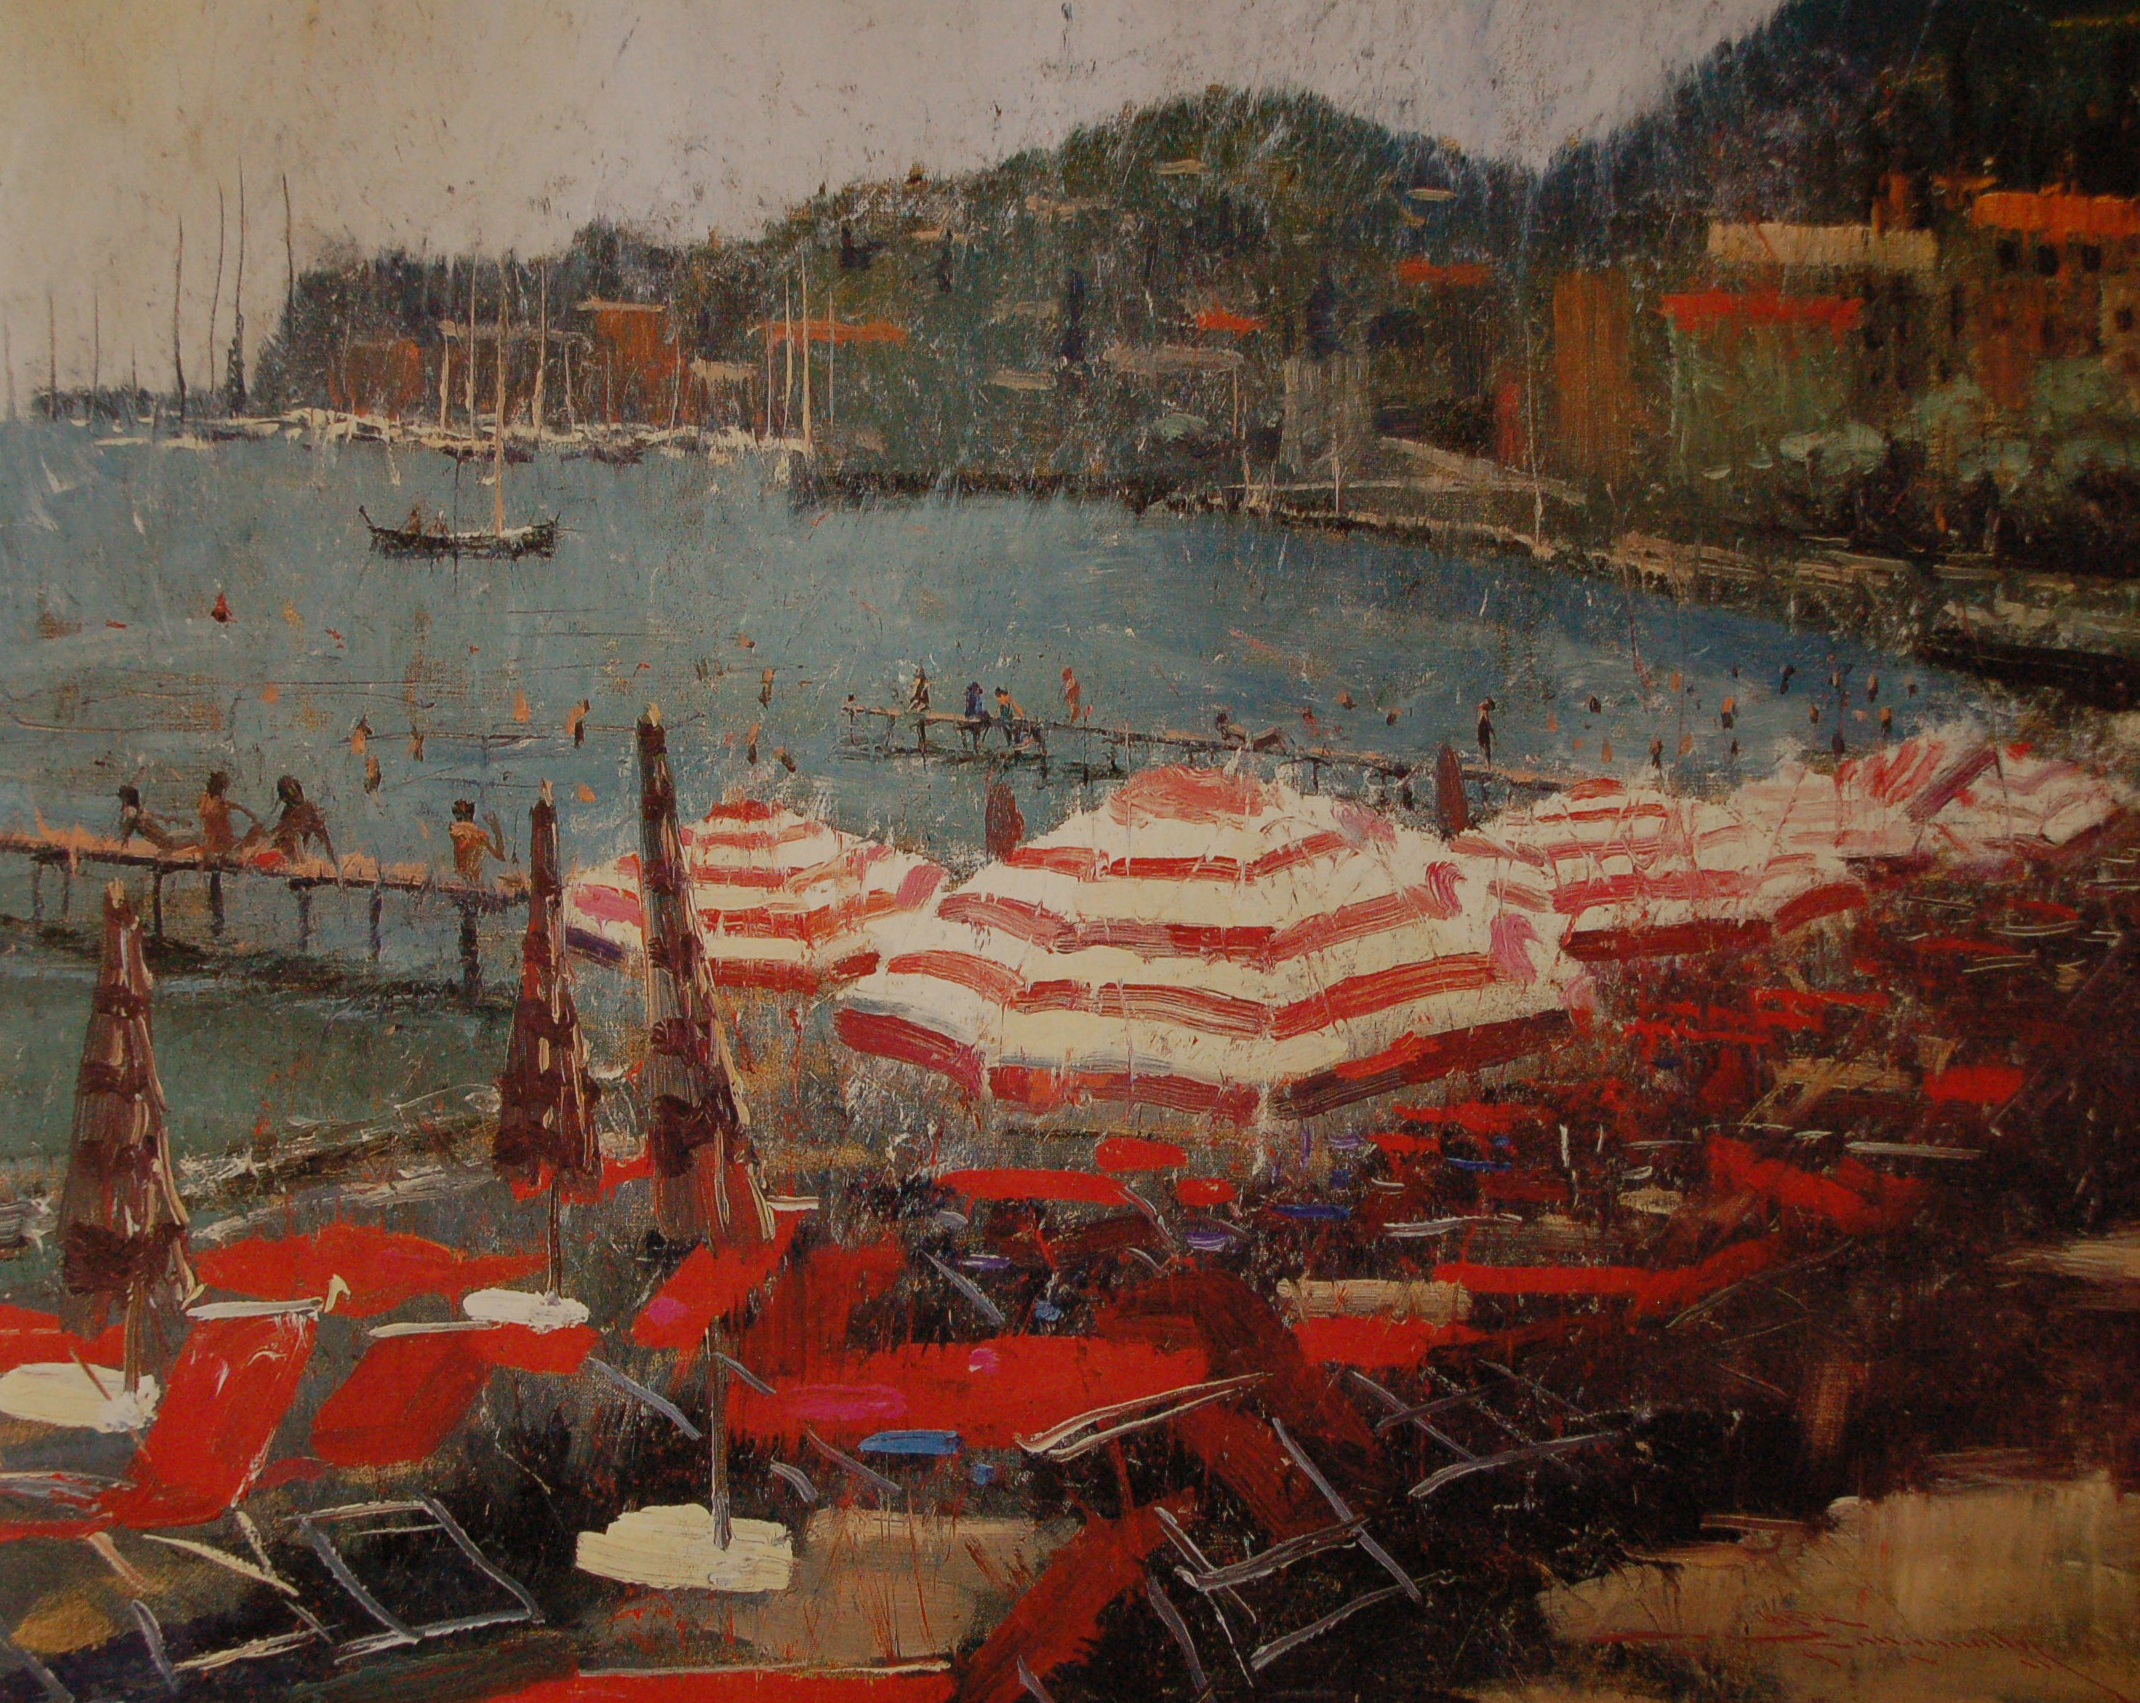 C.W. Mundy, "Red Striped Umbrellas, Santa Margherita Ligure," (Italy Light & Color 1996 Collection), 16 x 20 inches, oil on linen, painted en plein air, Private Collection